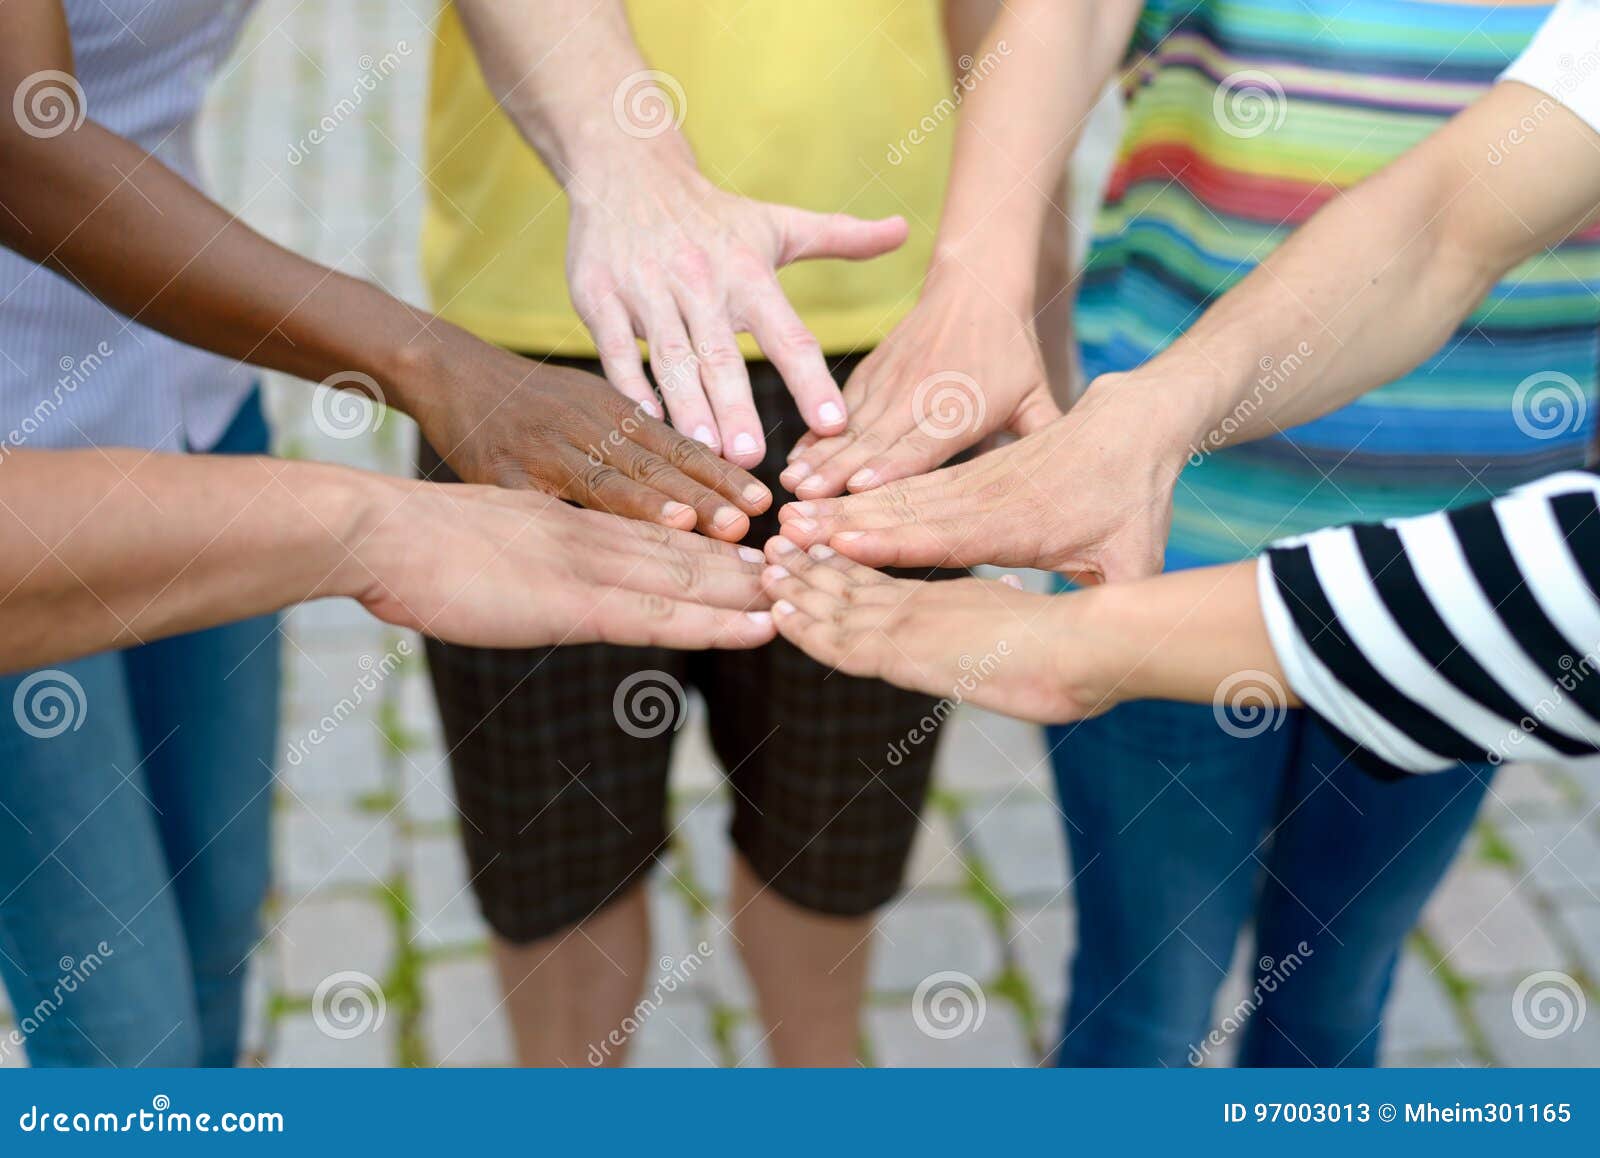 group of people touching hands in a circle